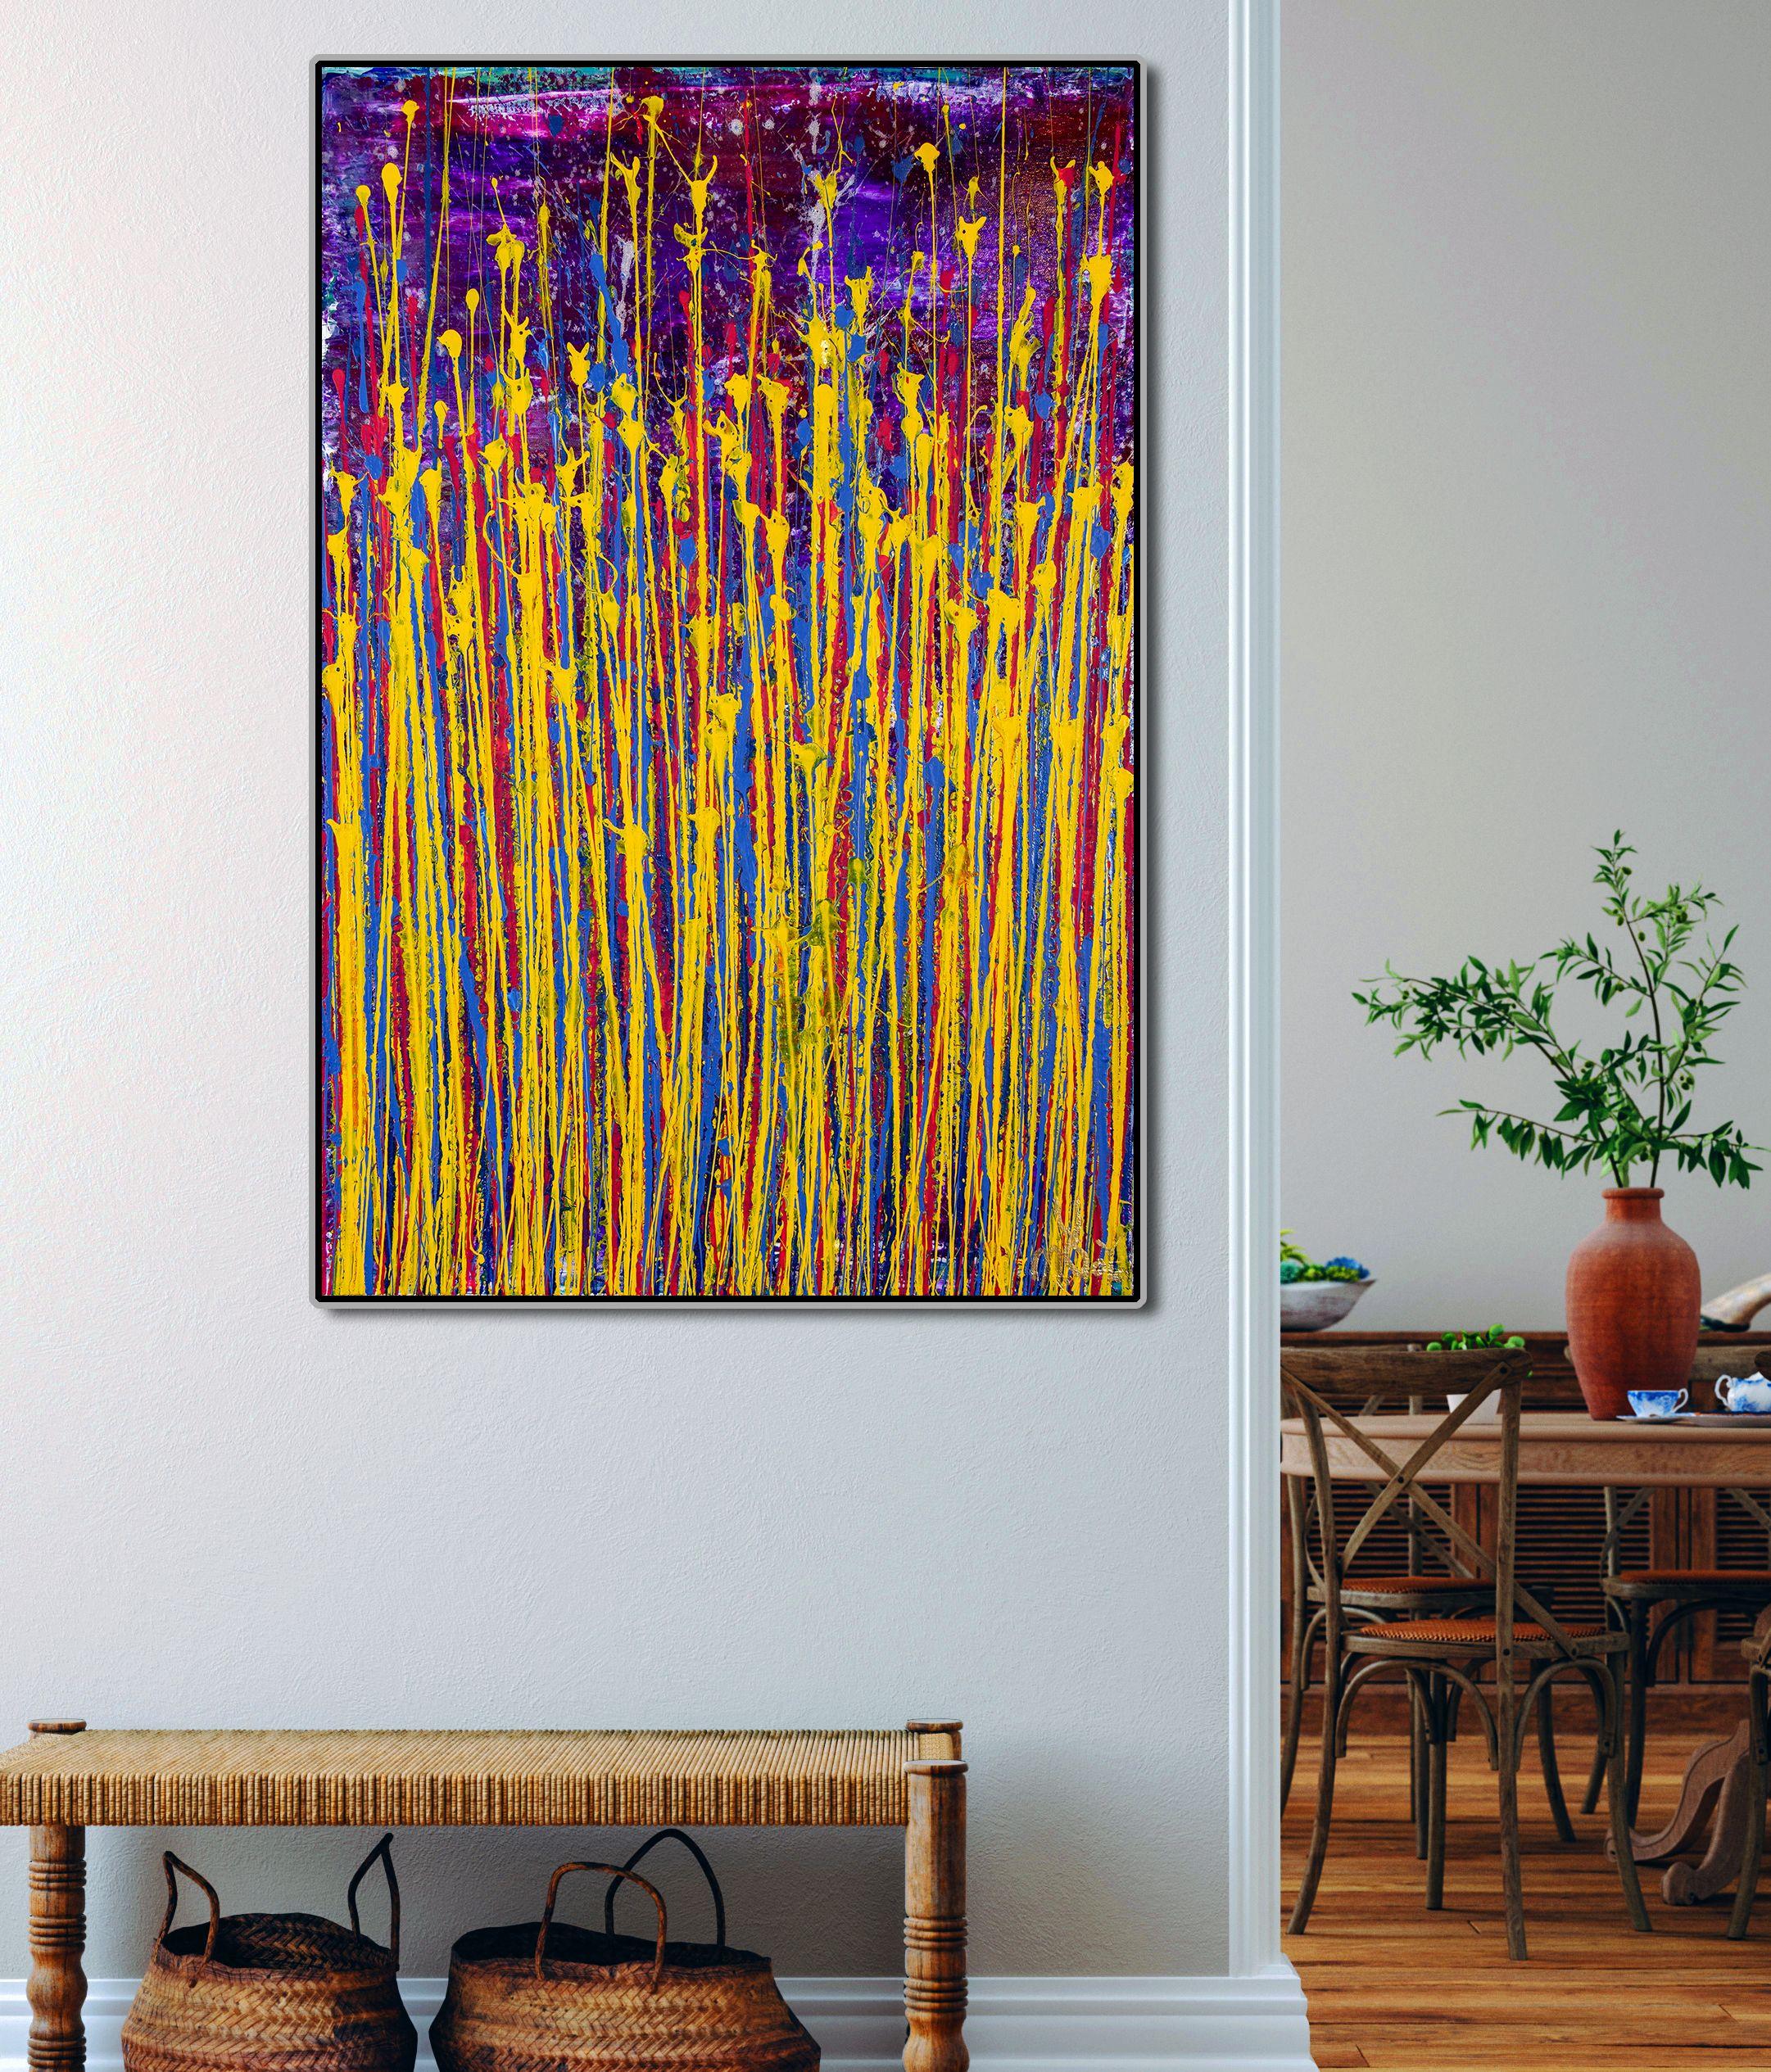 Expressive modern abstract, bold full of life, gloss and shimmer! inspired by nature, many shades and hues, red, purple, yellow, blue over bold purple background. signed in front.    I include a certificate of authenticity that lists the materials